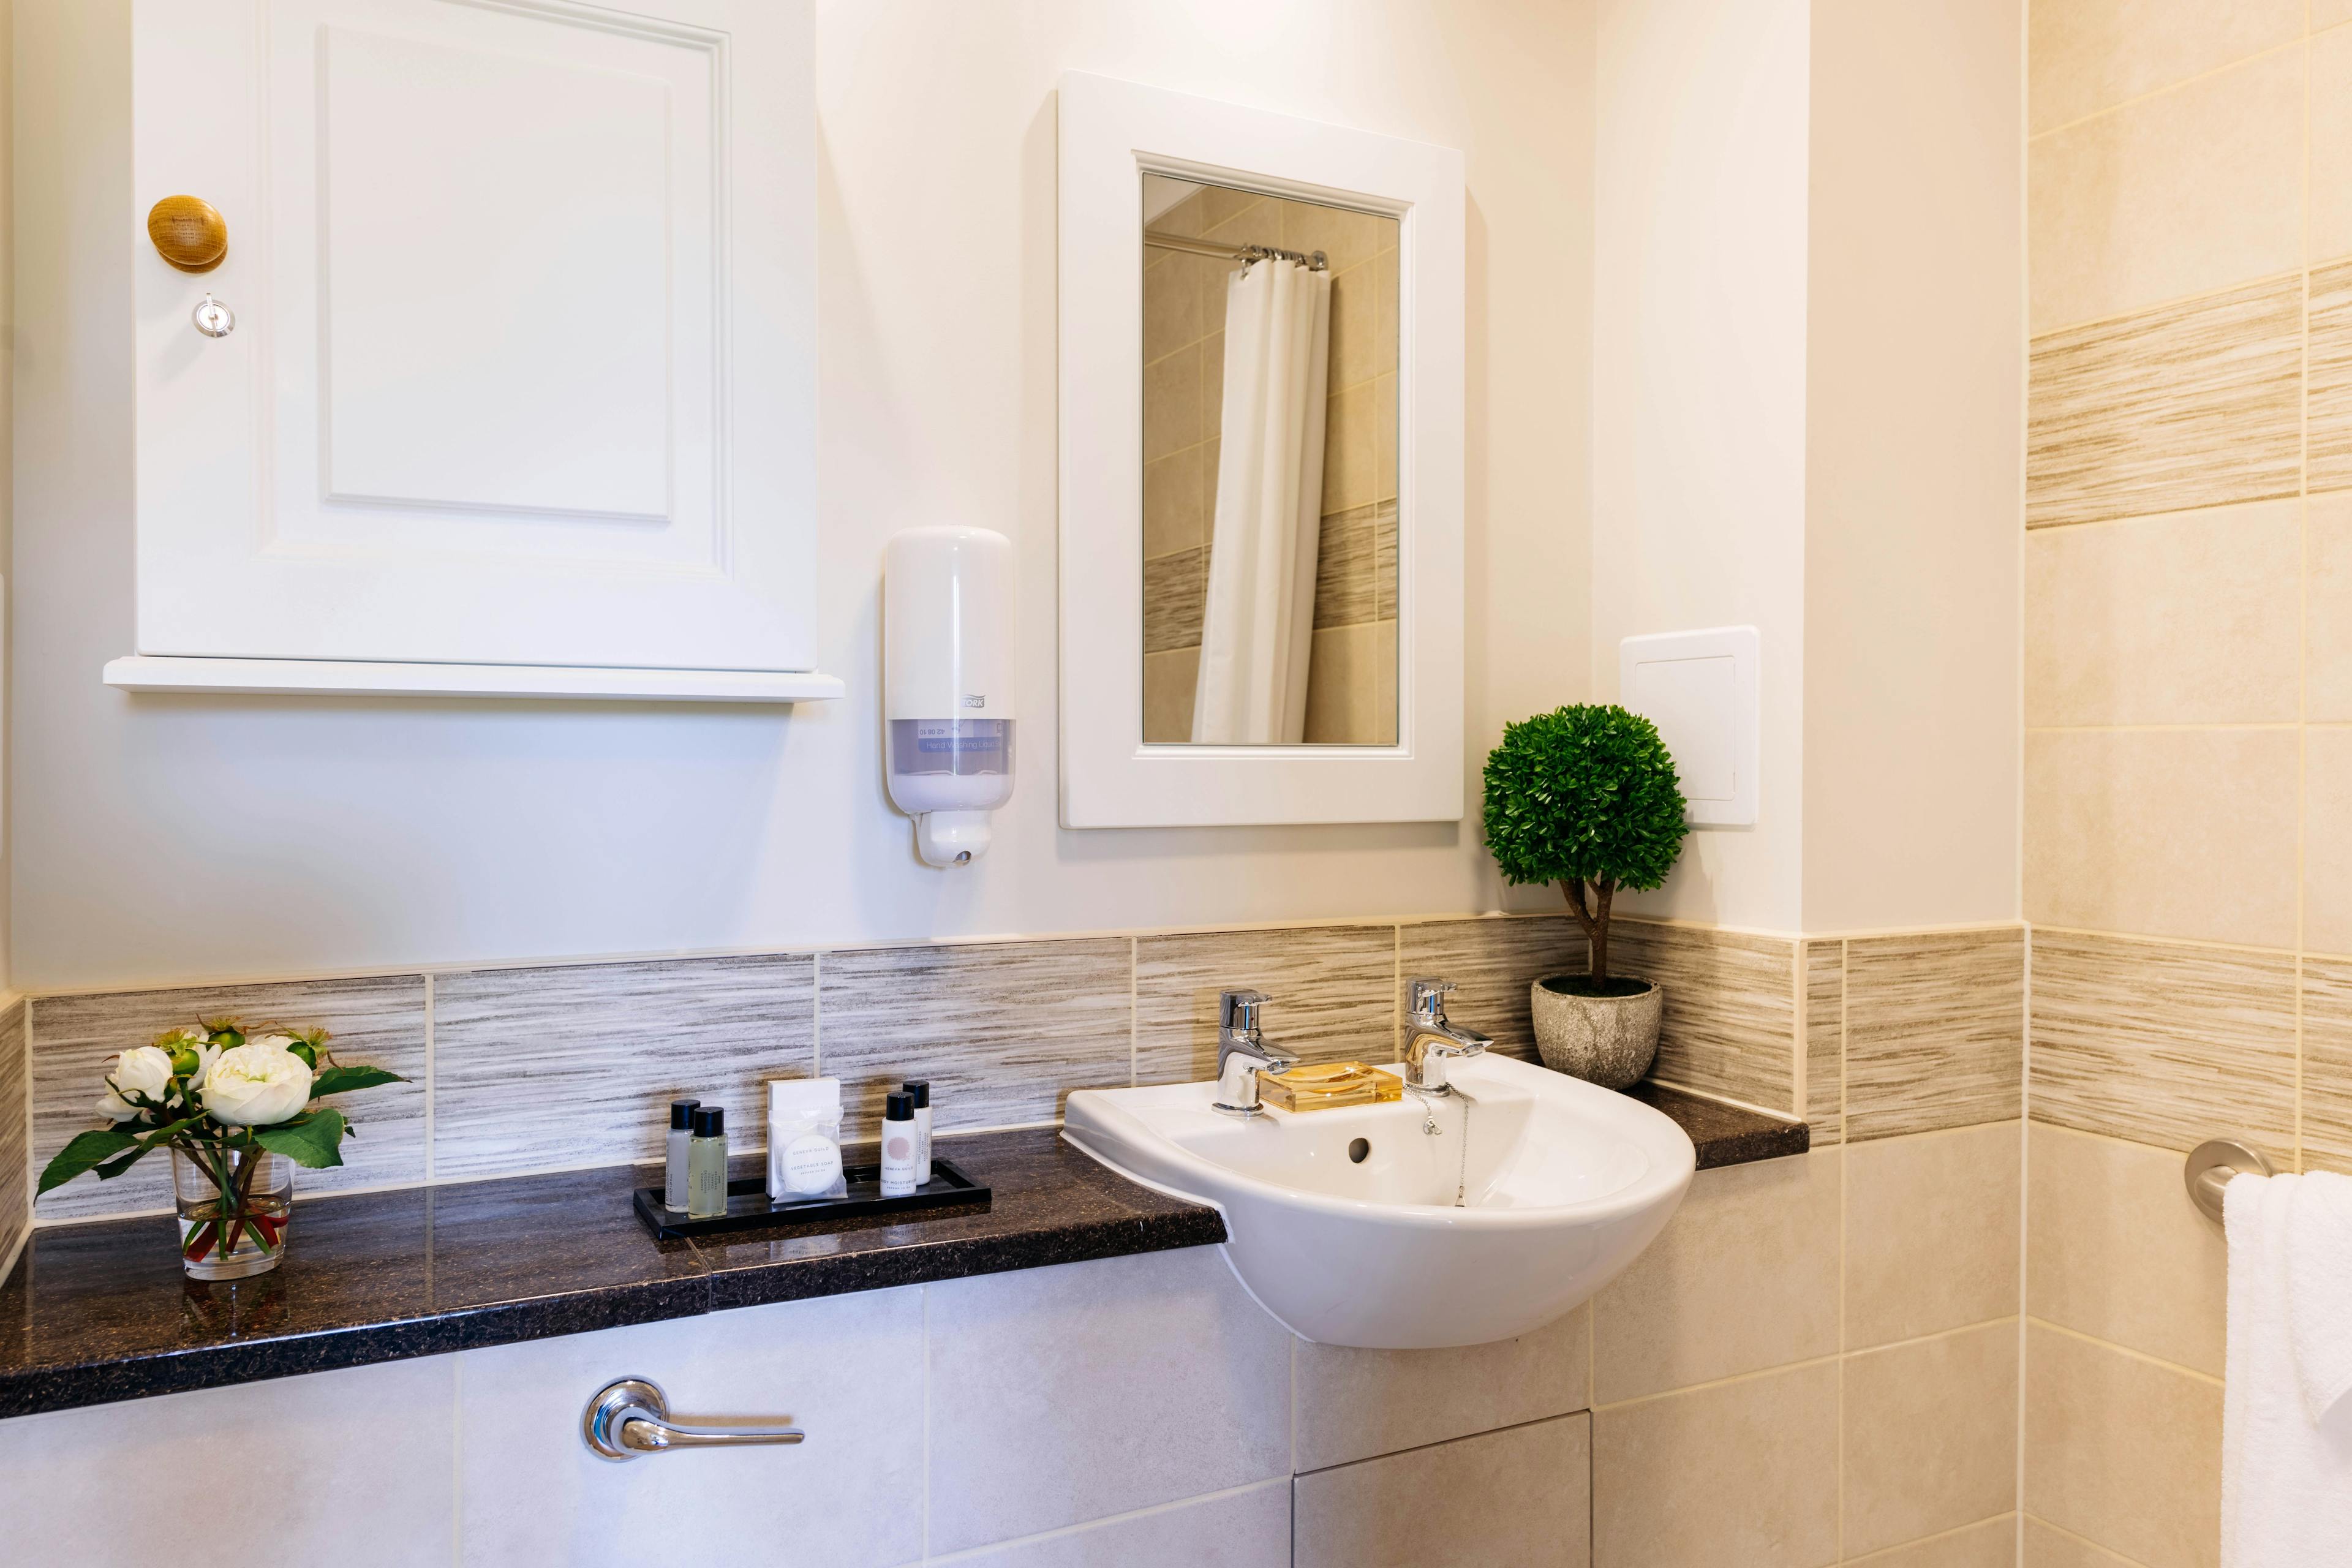 Bathroom at Snowdrop Place Care Home in Southampton, Hampshire